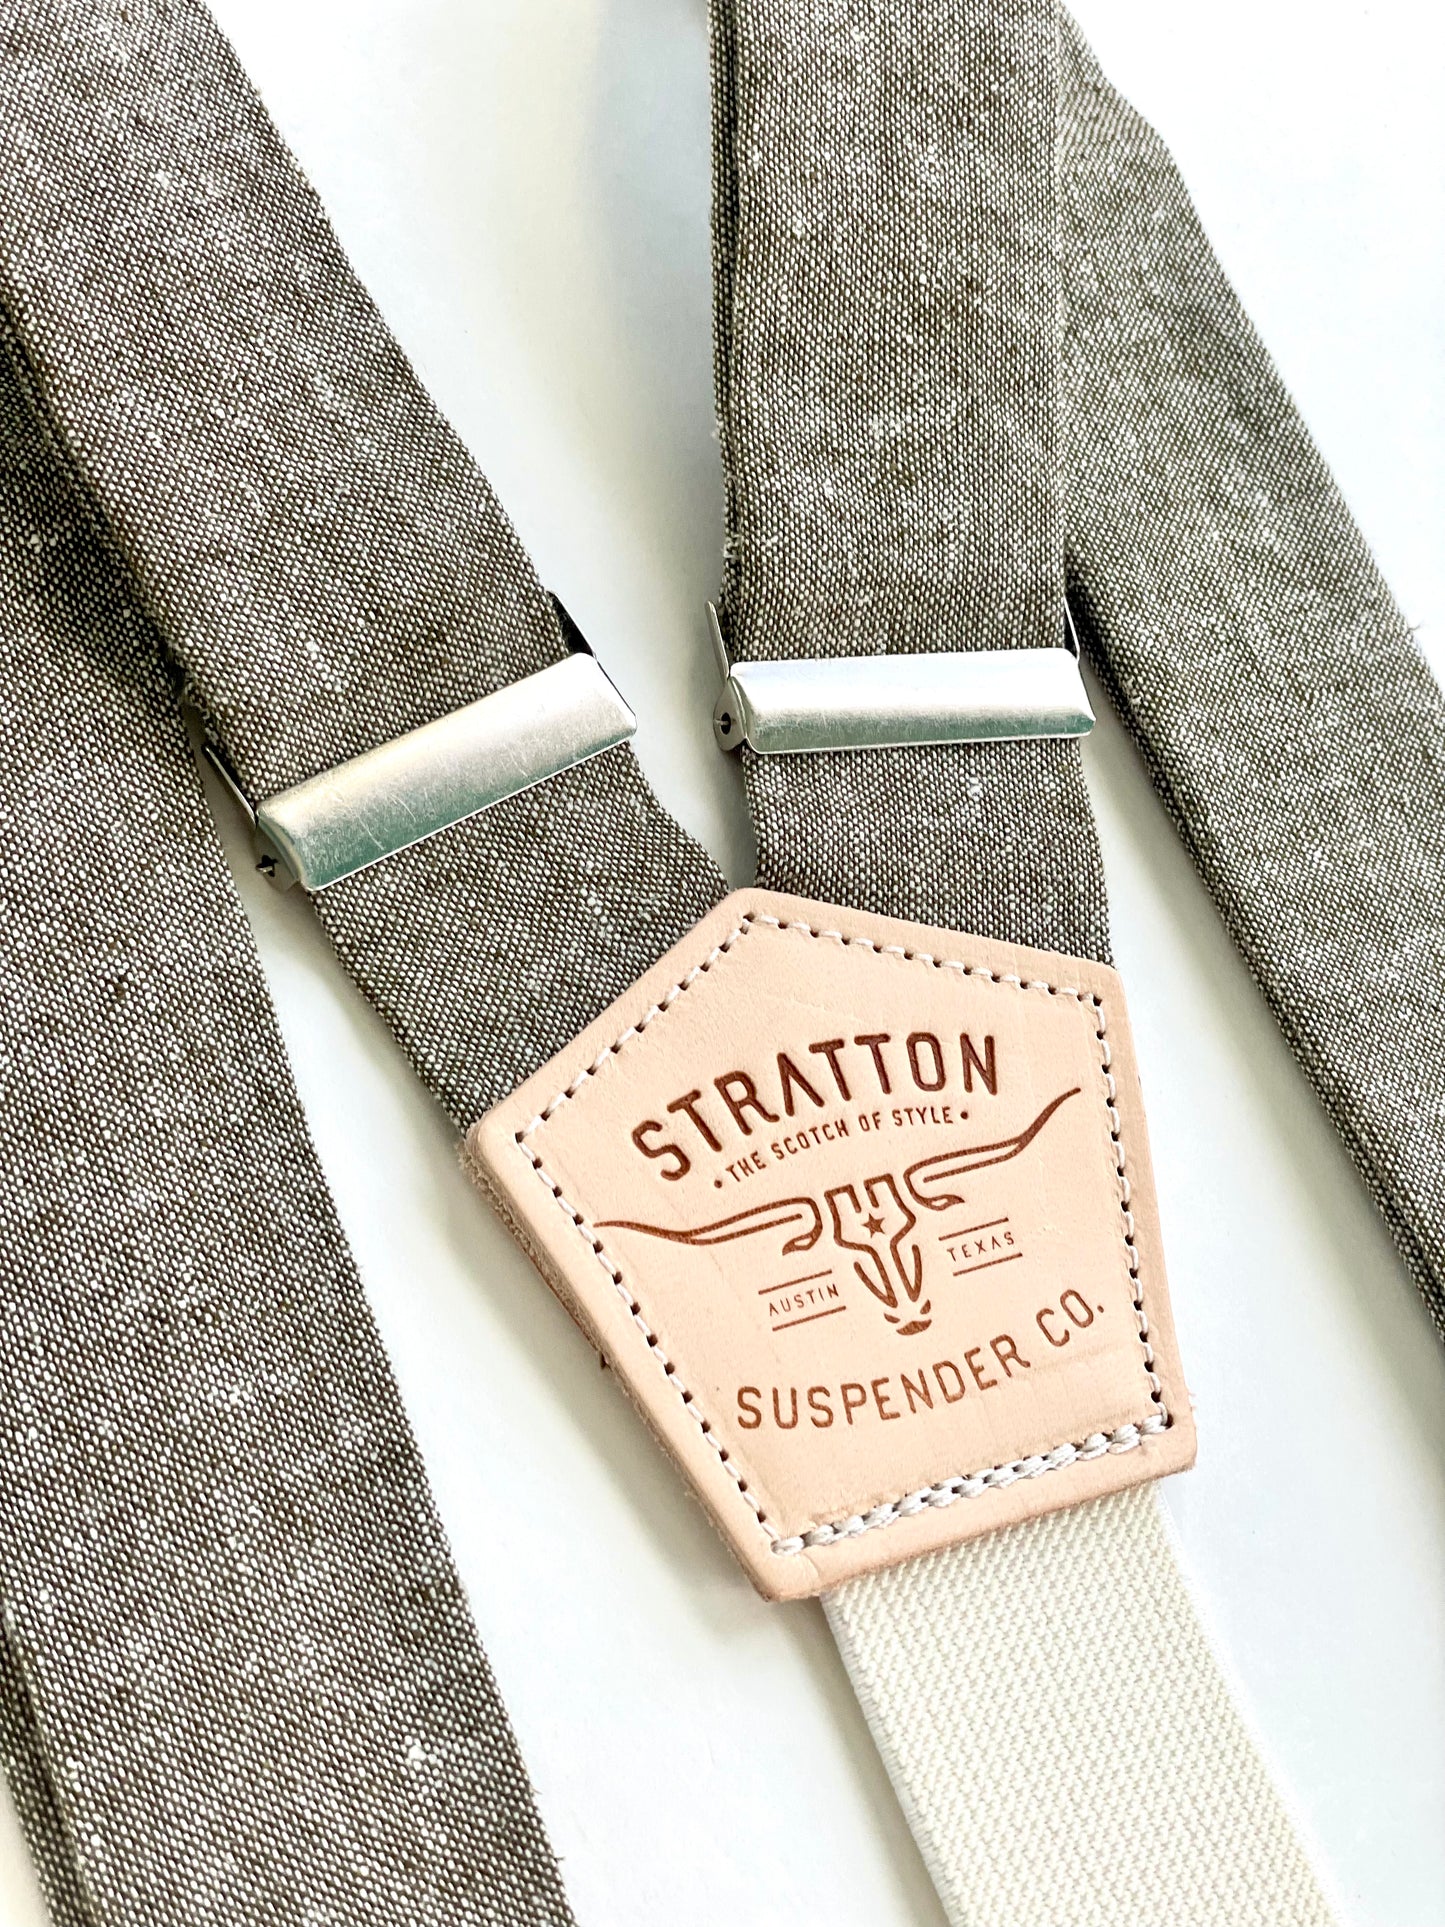 Olive Green Linen Button On Suspenders Set - Fall Collection Stratton Suspender Co.